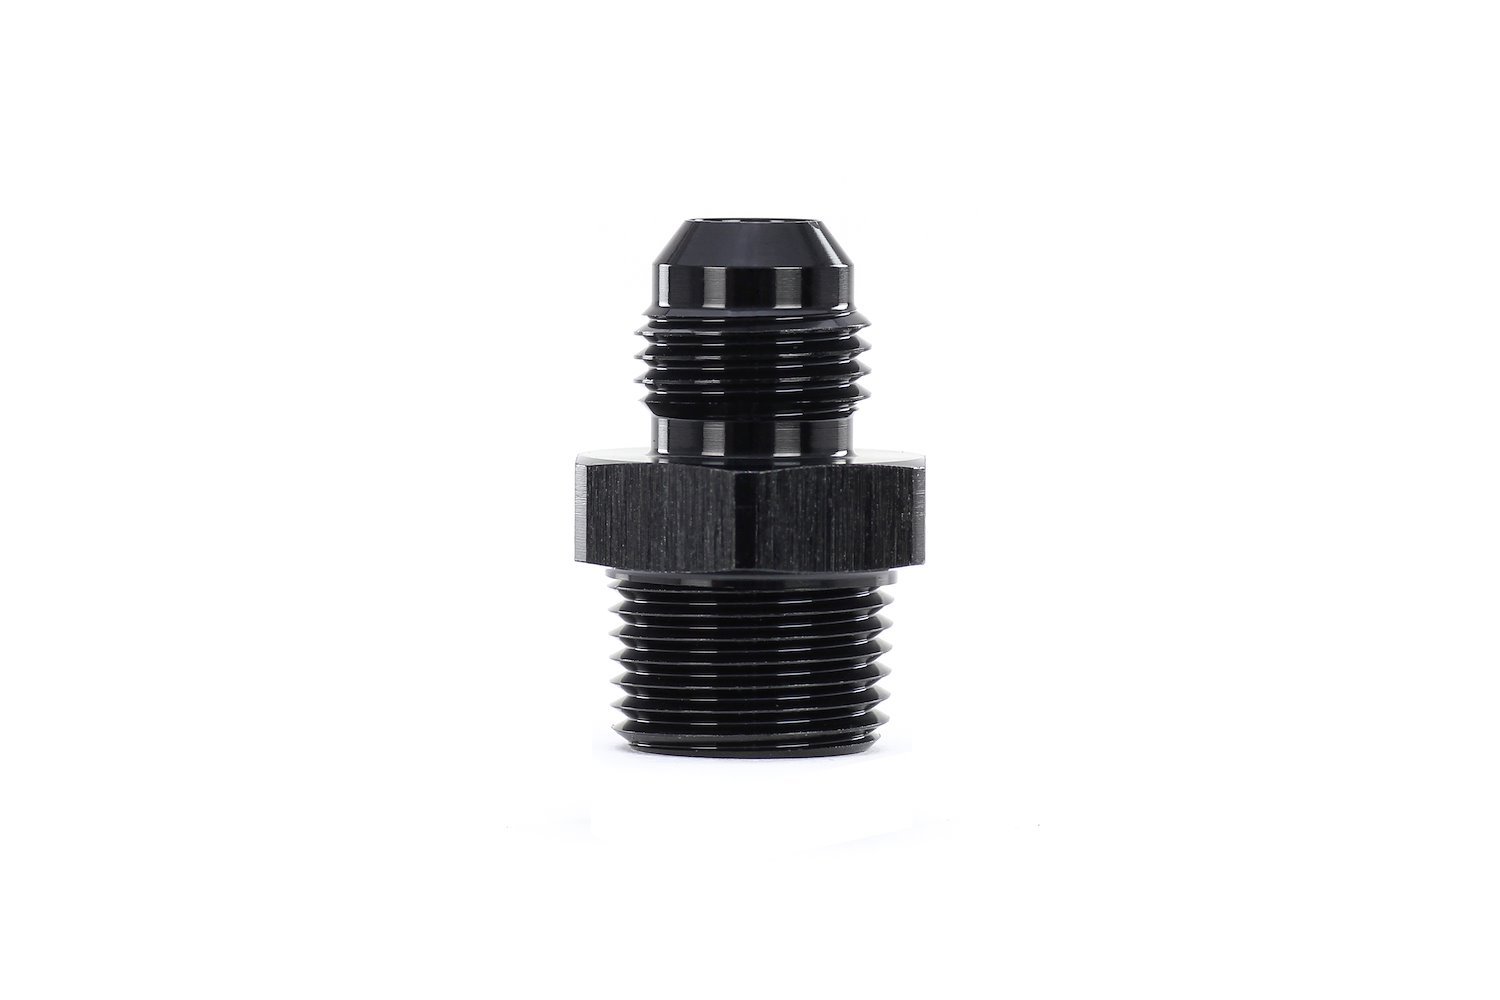 AN8166xM1815 AN Flare to Metric Adapter, Convert Metric Female Threads To Male An Flare